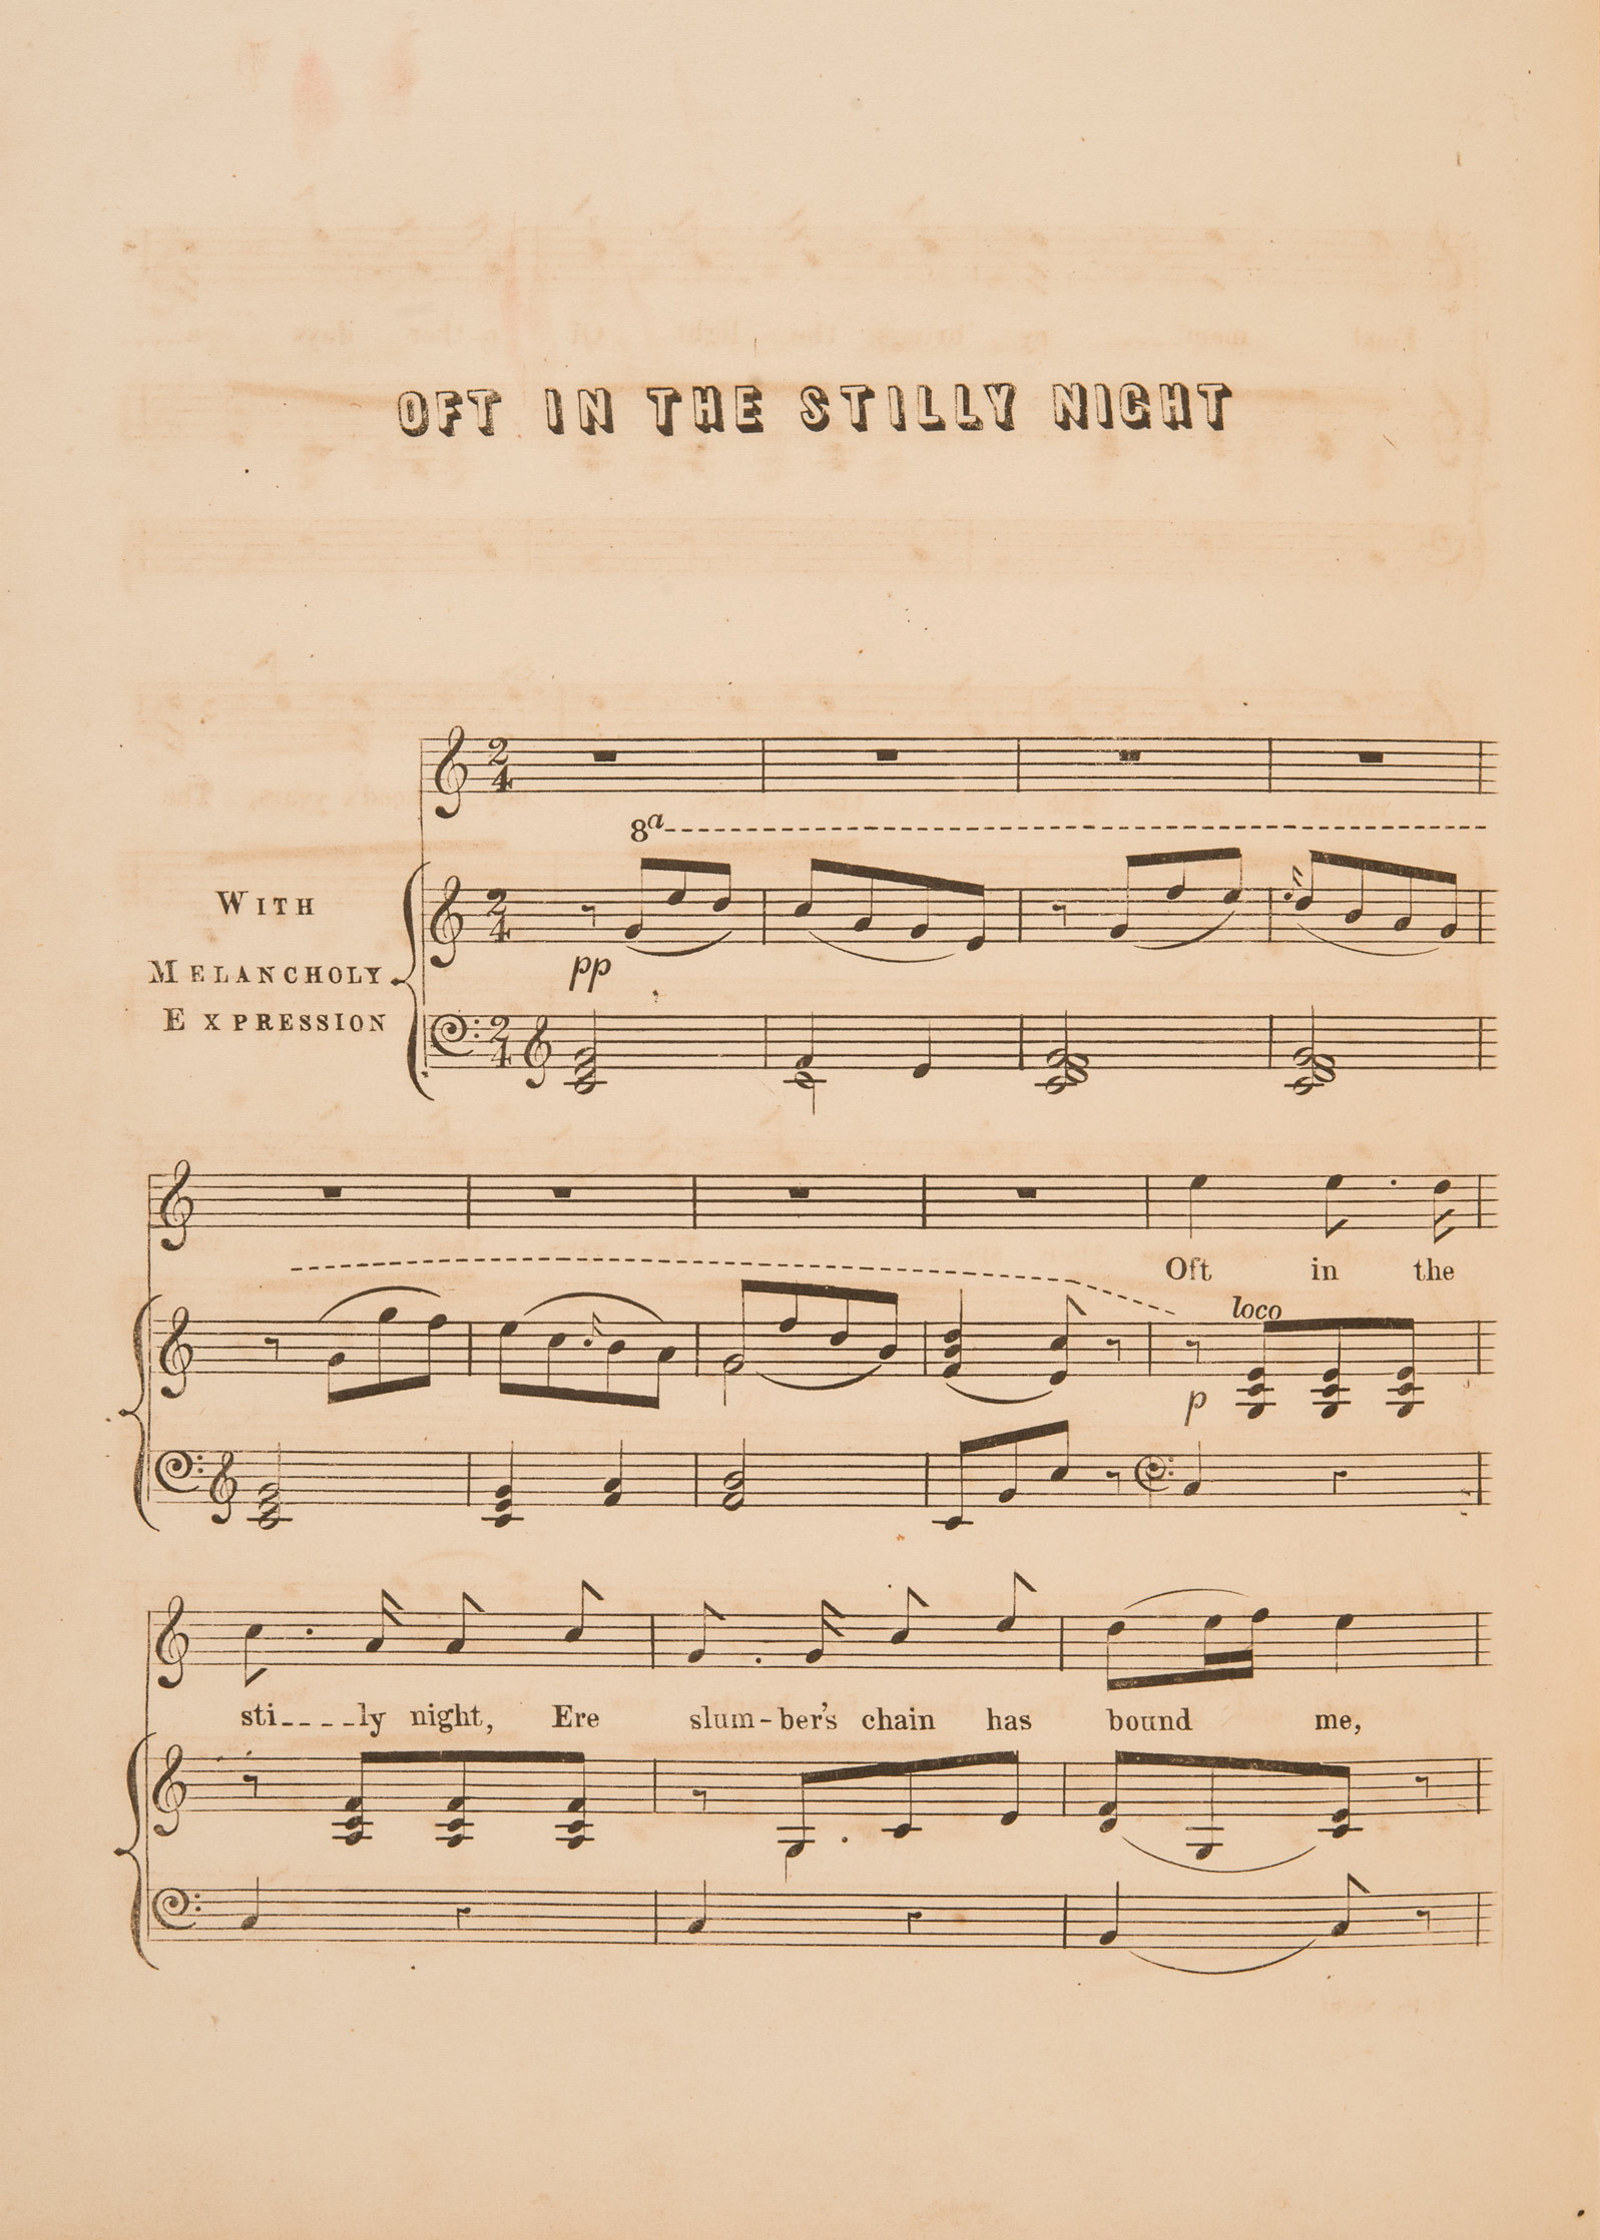 Sheet music, 'Oft in the Stilly Night,' by Thomas Moore, page 1, circa 1858